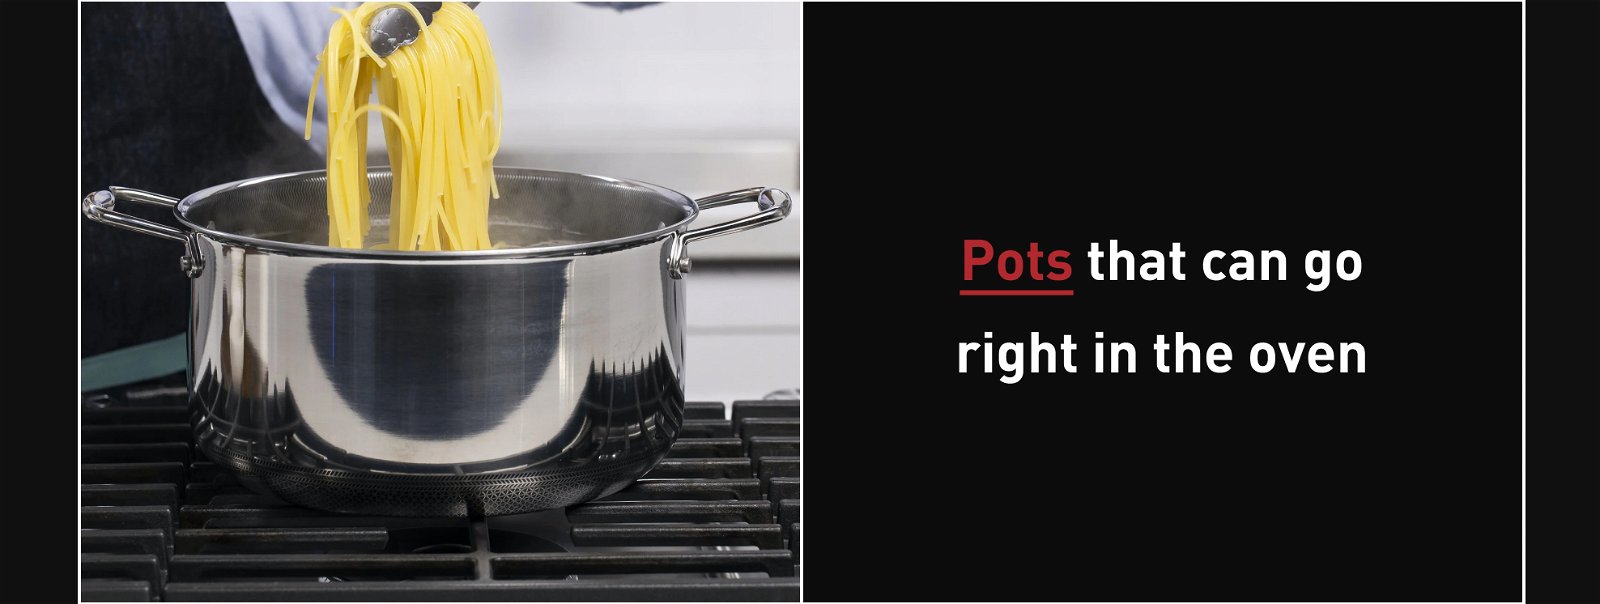 Pots that can go right in the oven